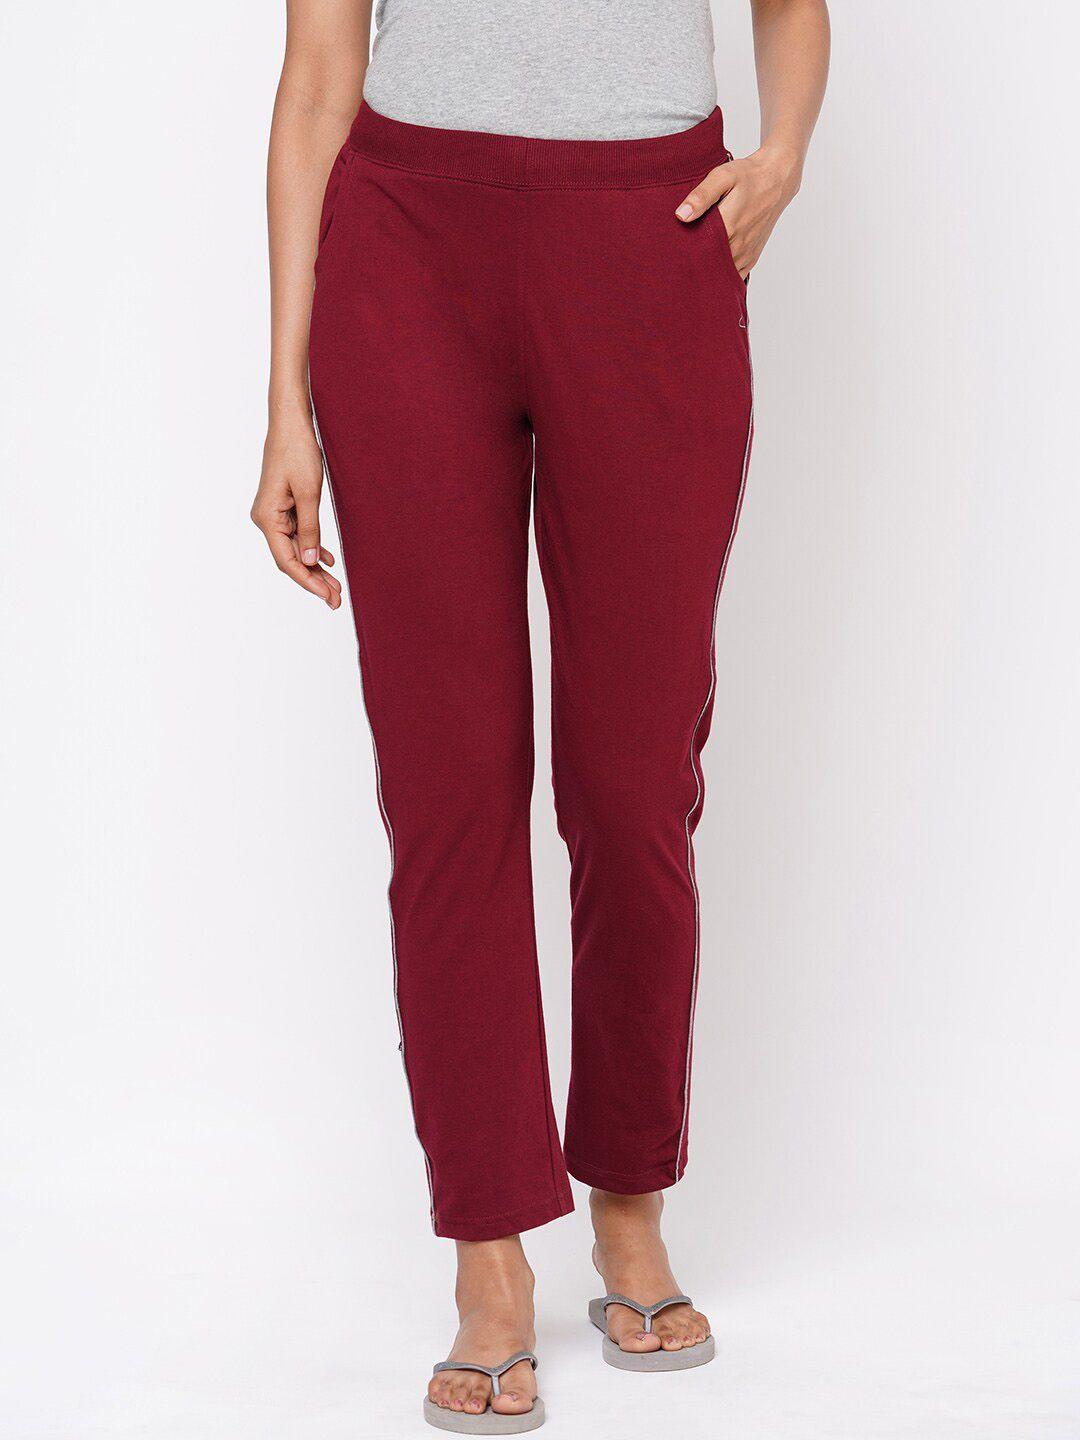 sweet-dreams-women-red-solid-cotton-lounge-pants